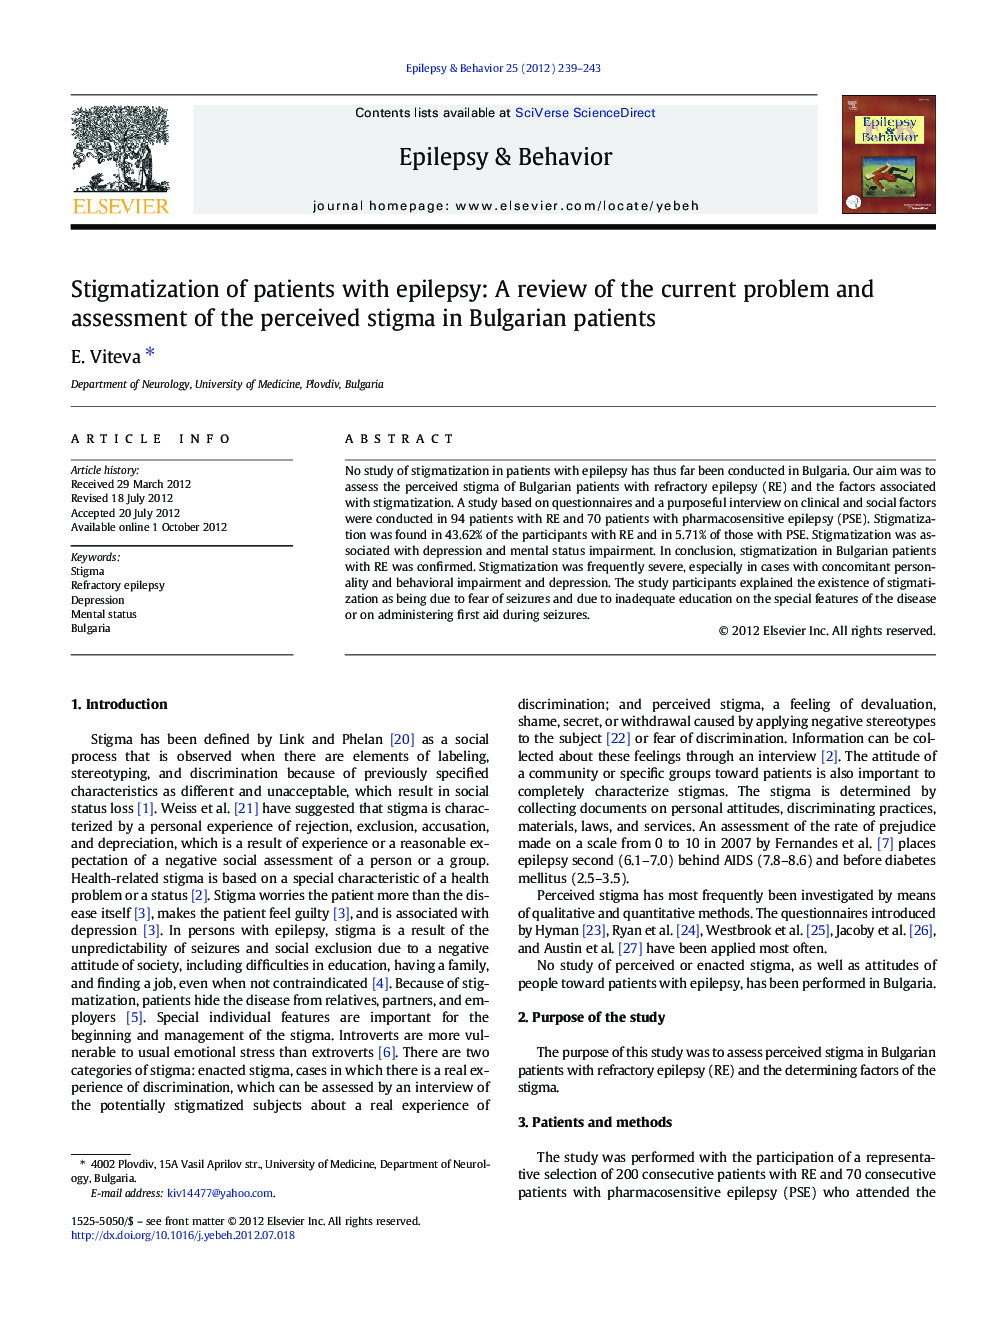 Stigmatization of patients with epilepsy: A review of the current problem and assessment of the perceived stigma in Bulgarian patients